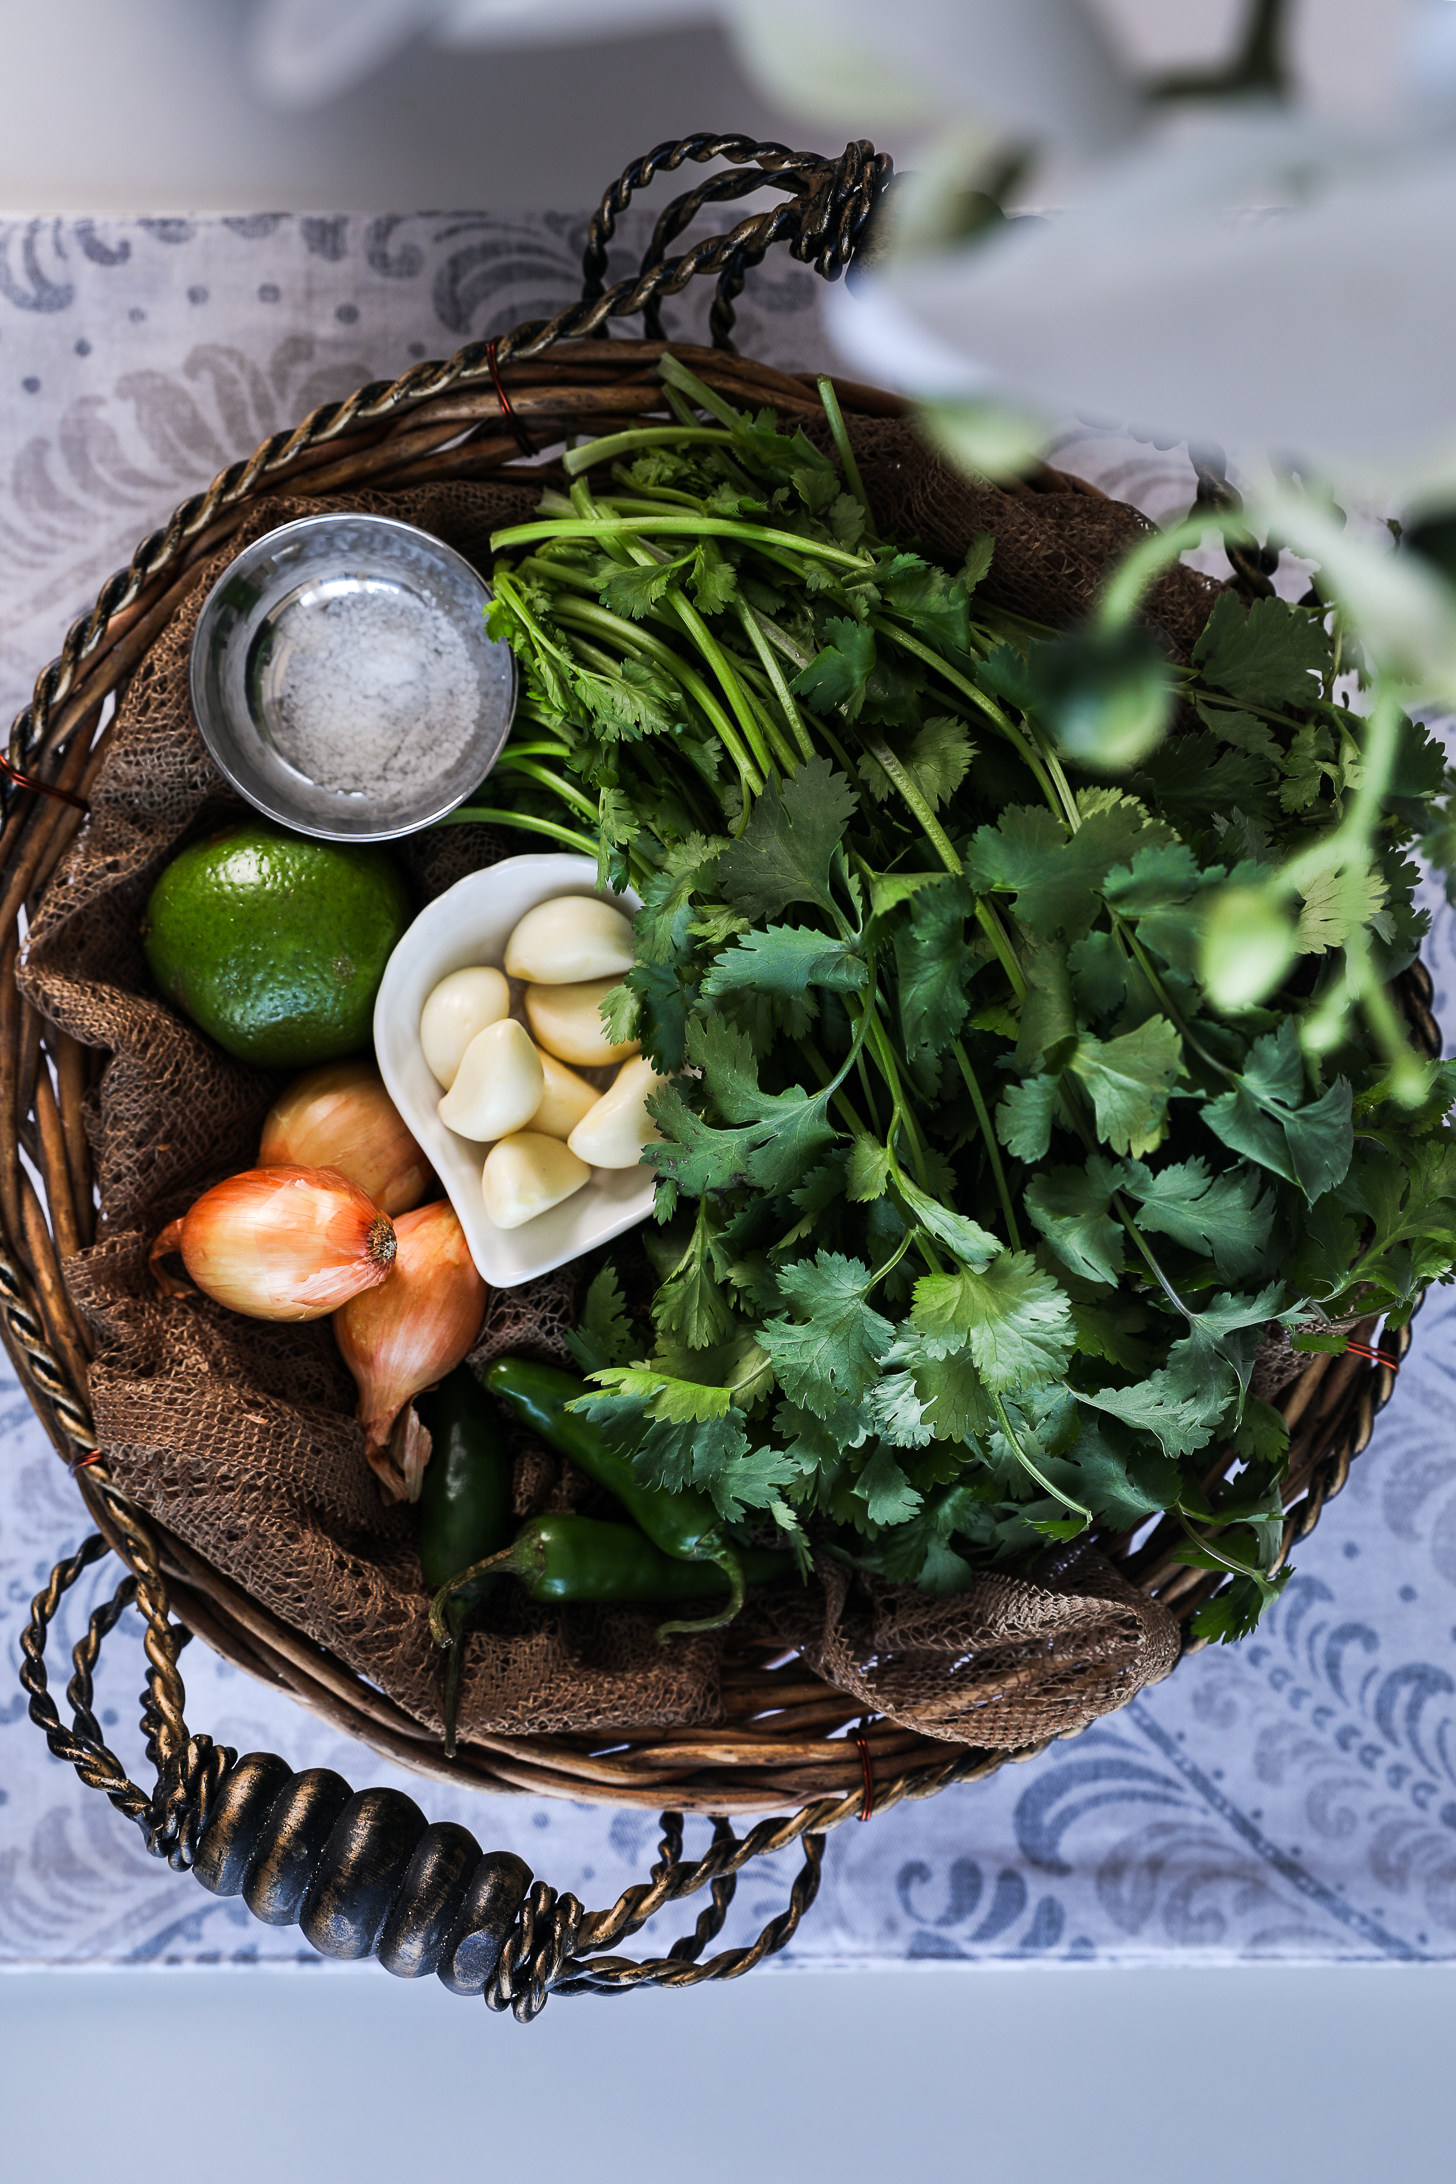 Top view image of a basket of food ingredients including fresh cilantro, garlic, shallots, lime, chillies and salt on a white printed tablecloth.